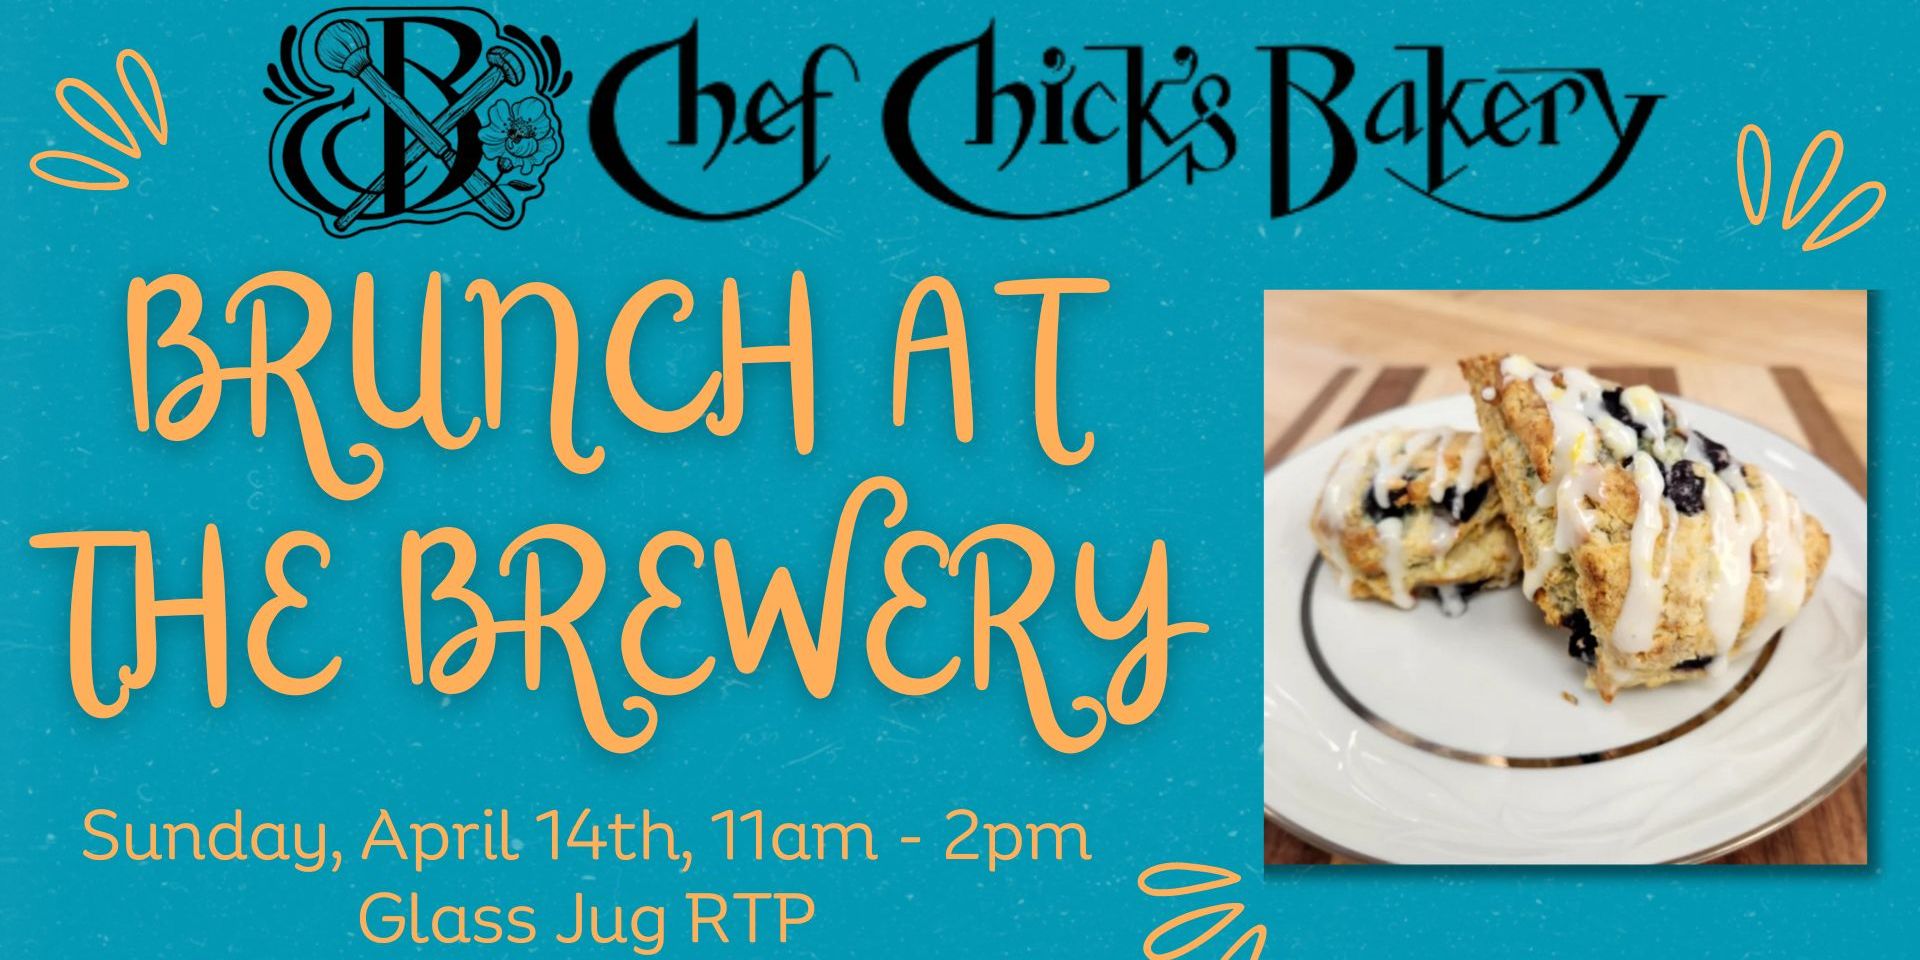 Brunch at the Brewery with Chef Chick's Bakery promotional image